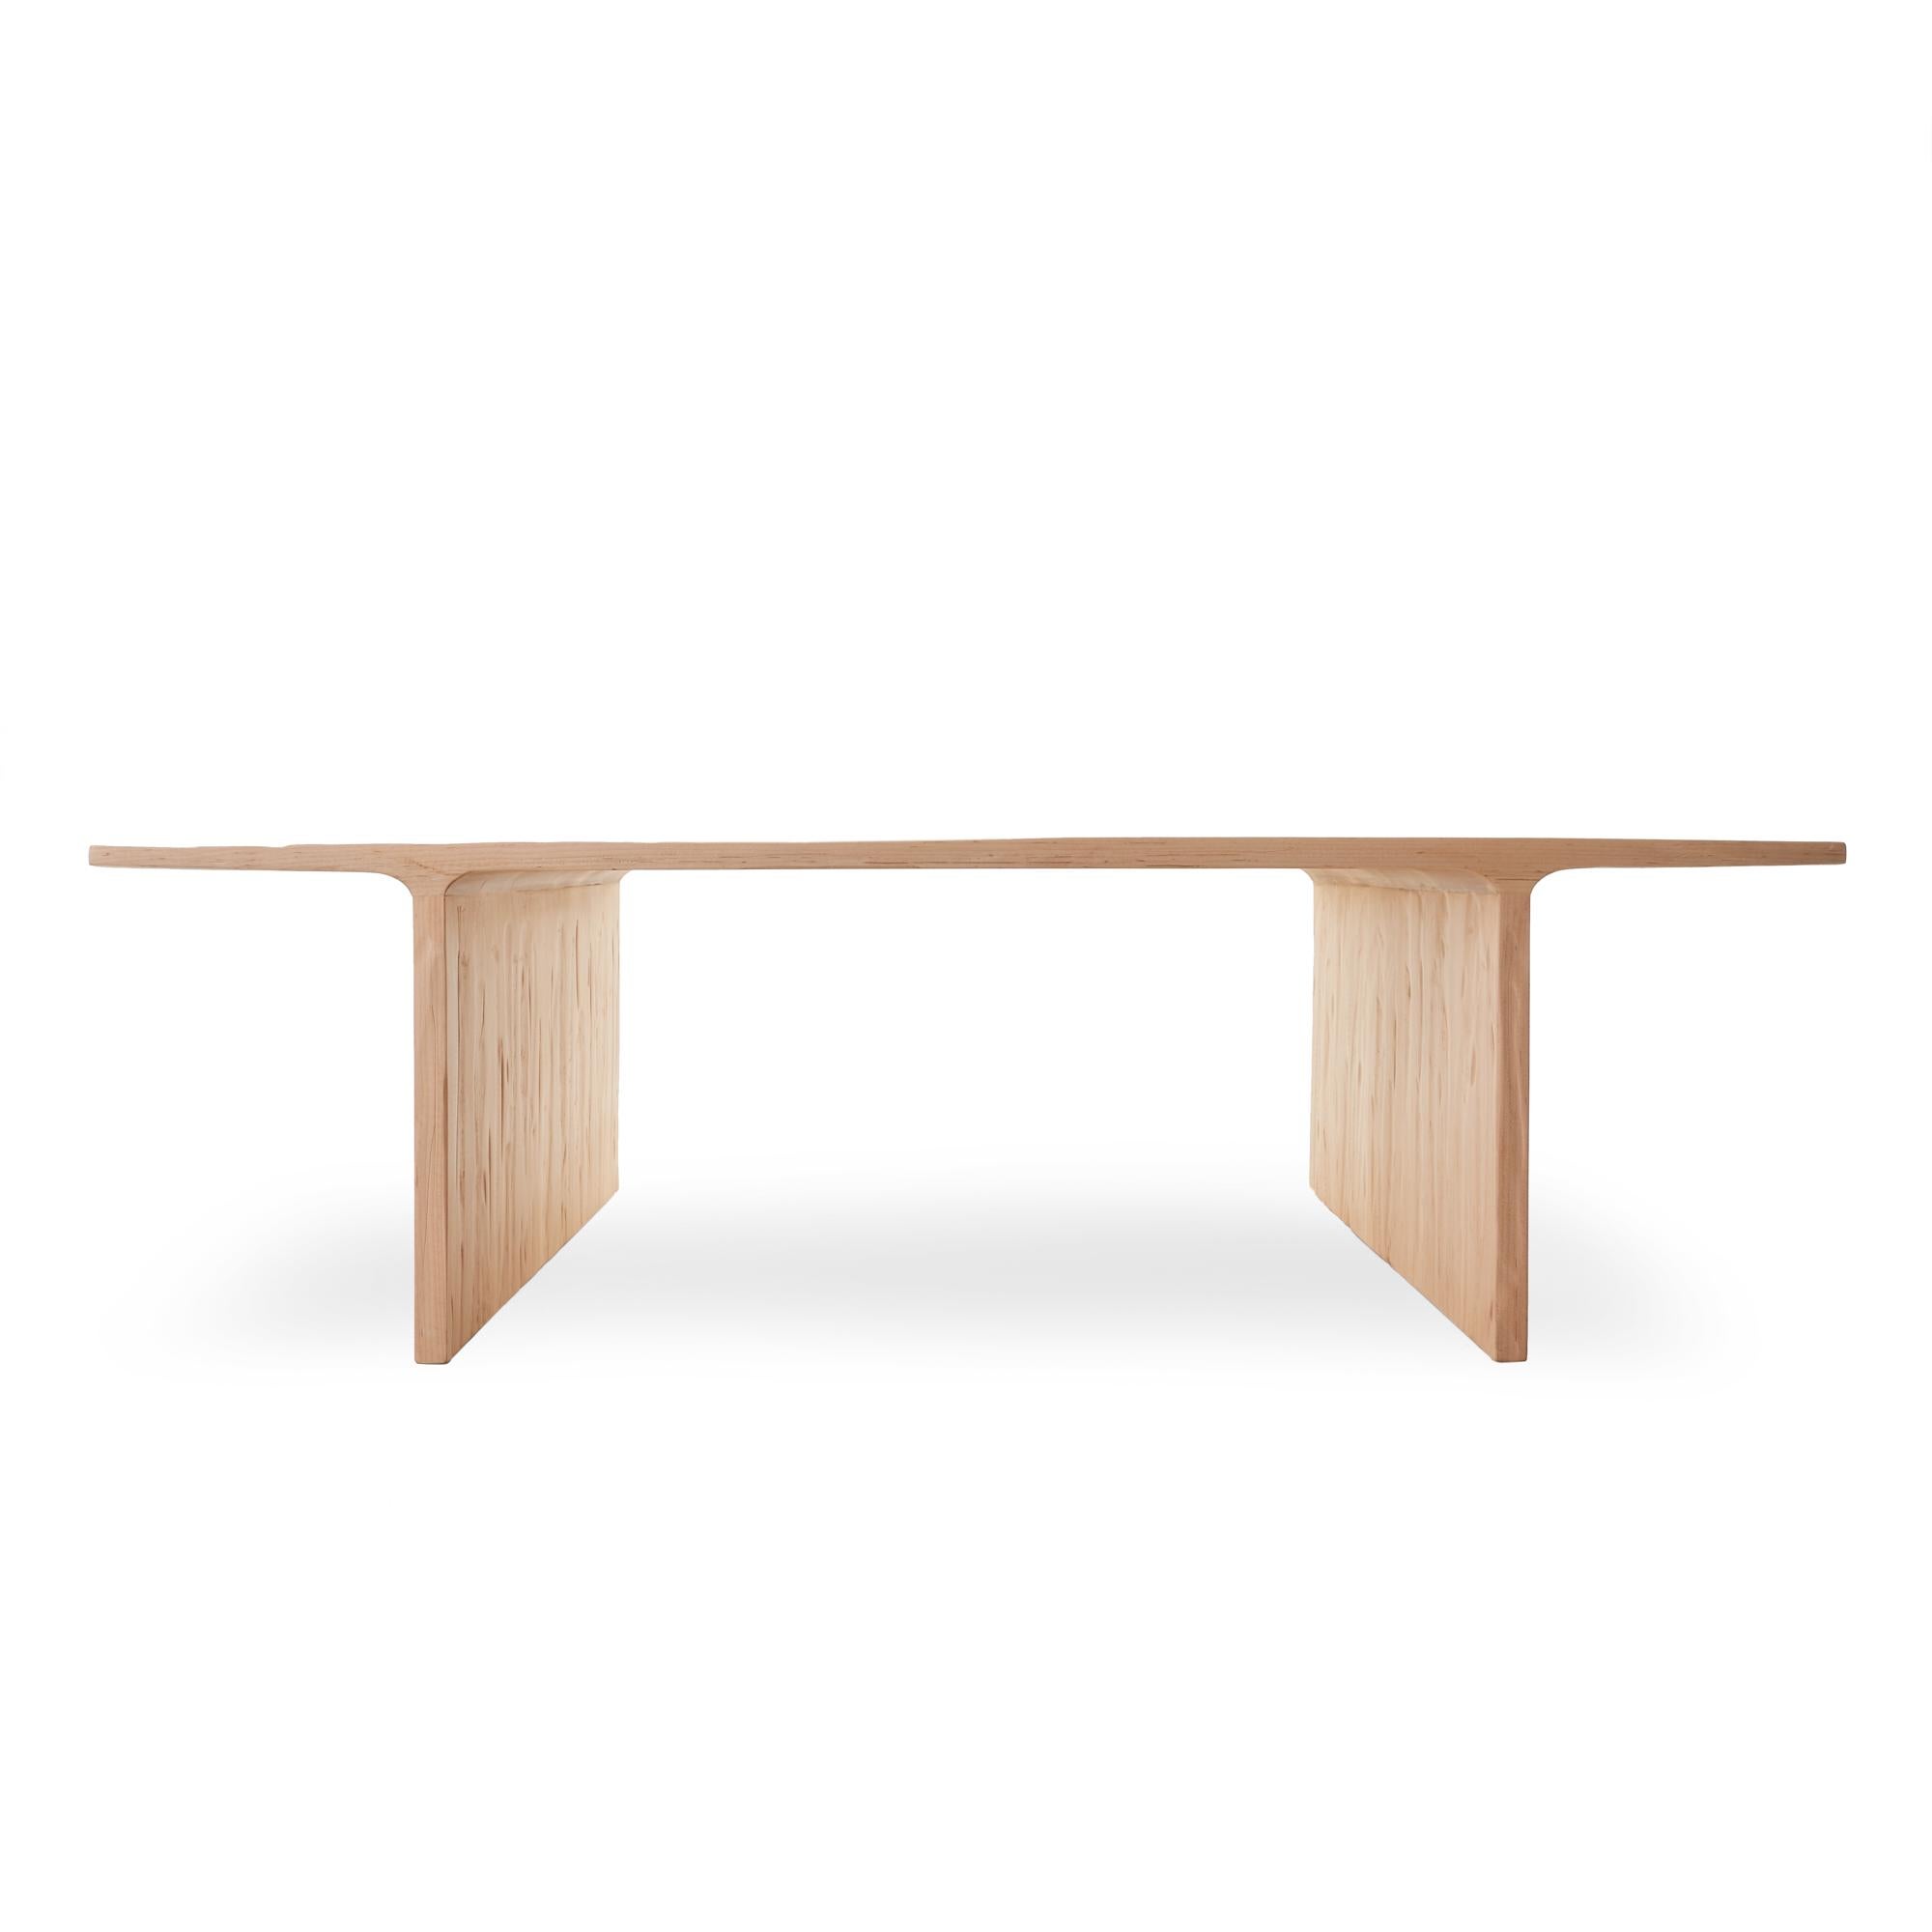 The Gil Melott Bespoke Uvalde F 1976 coffee table is a sleek and minimalist piece, while also rustic and time worn. Made by local Chicago woodworkers, the top has been carefully scraped and carved to resemble the striated bottom of Texas’ Frio river